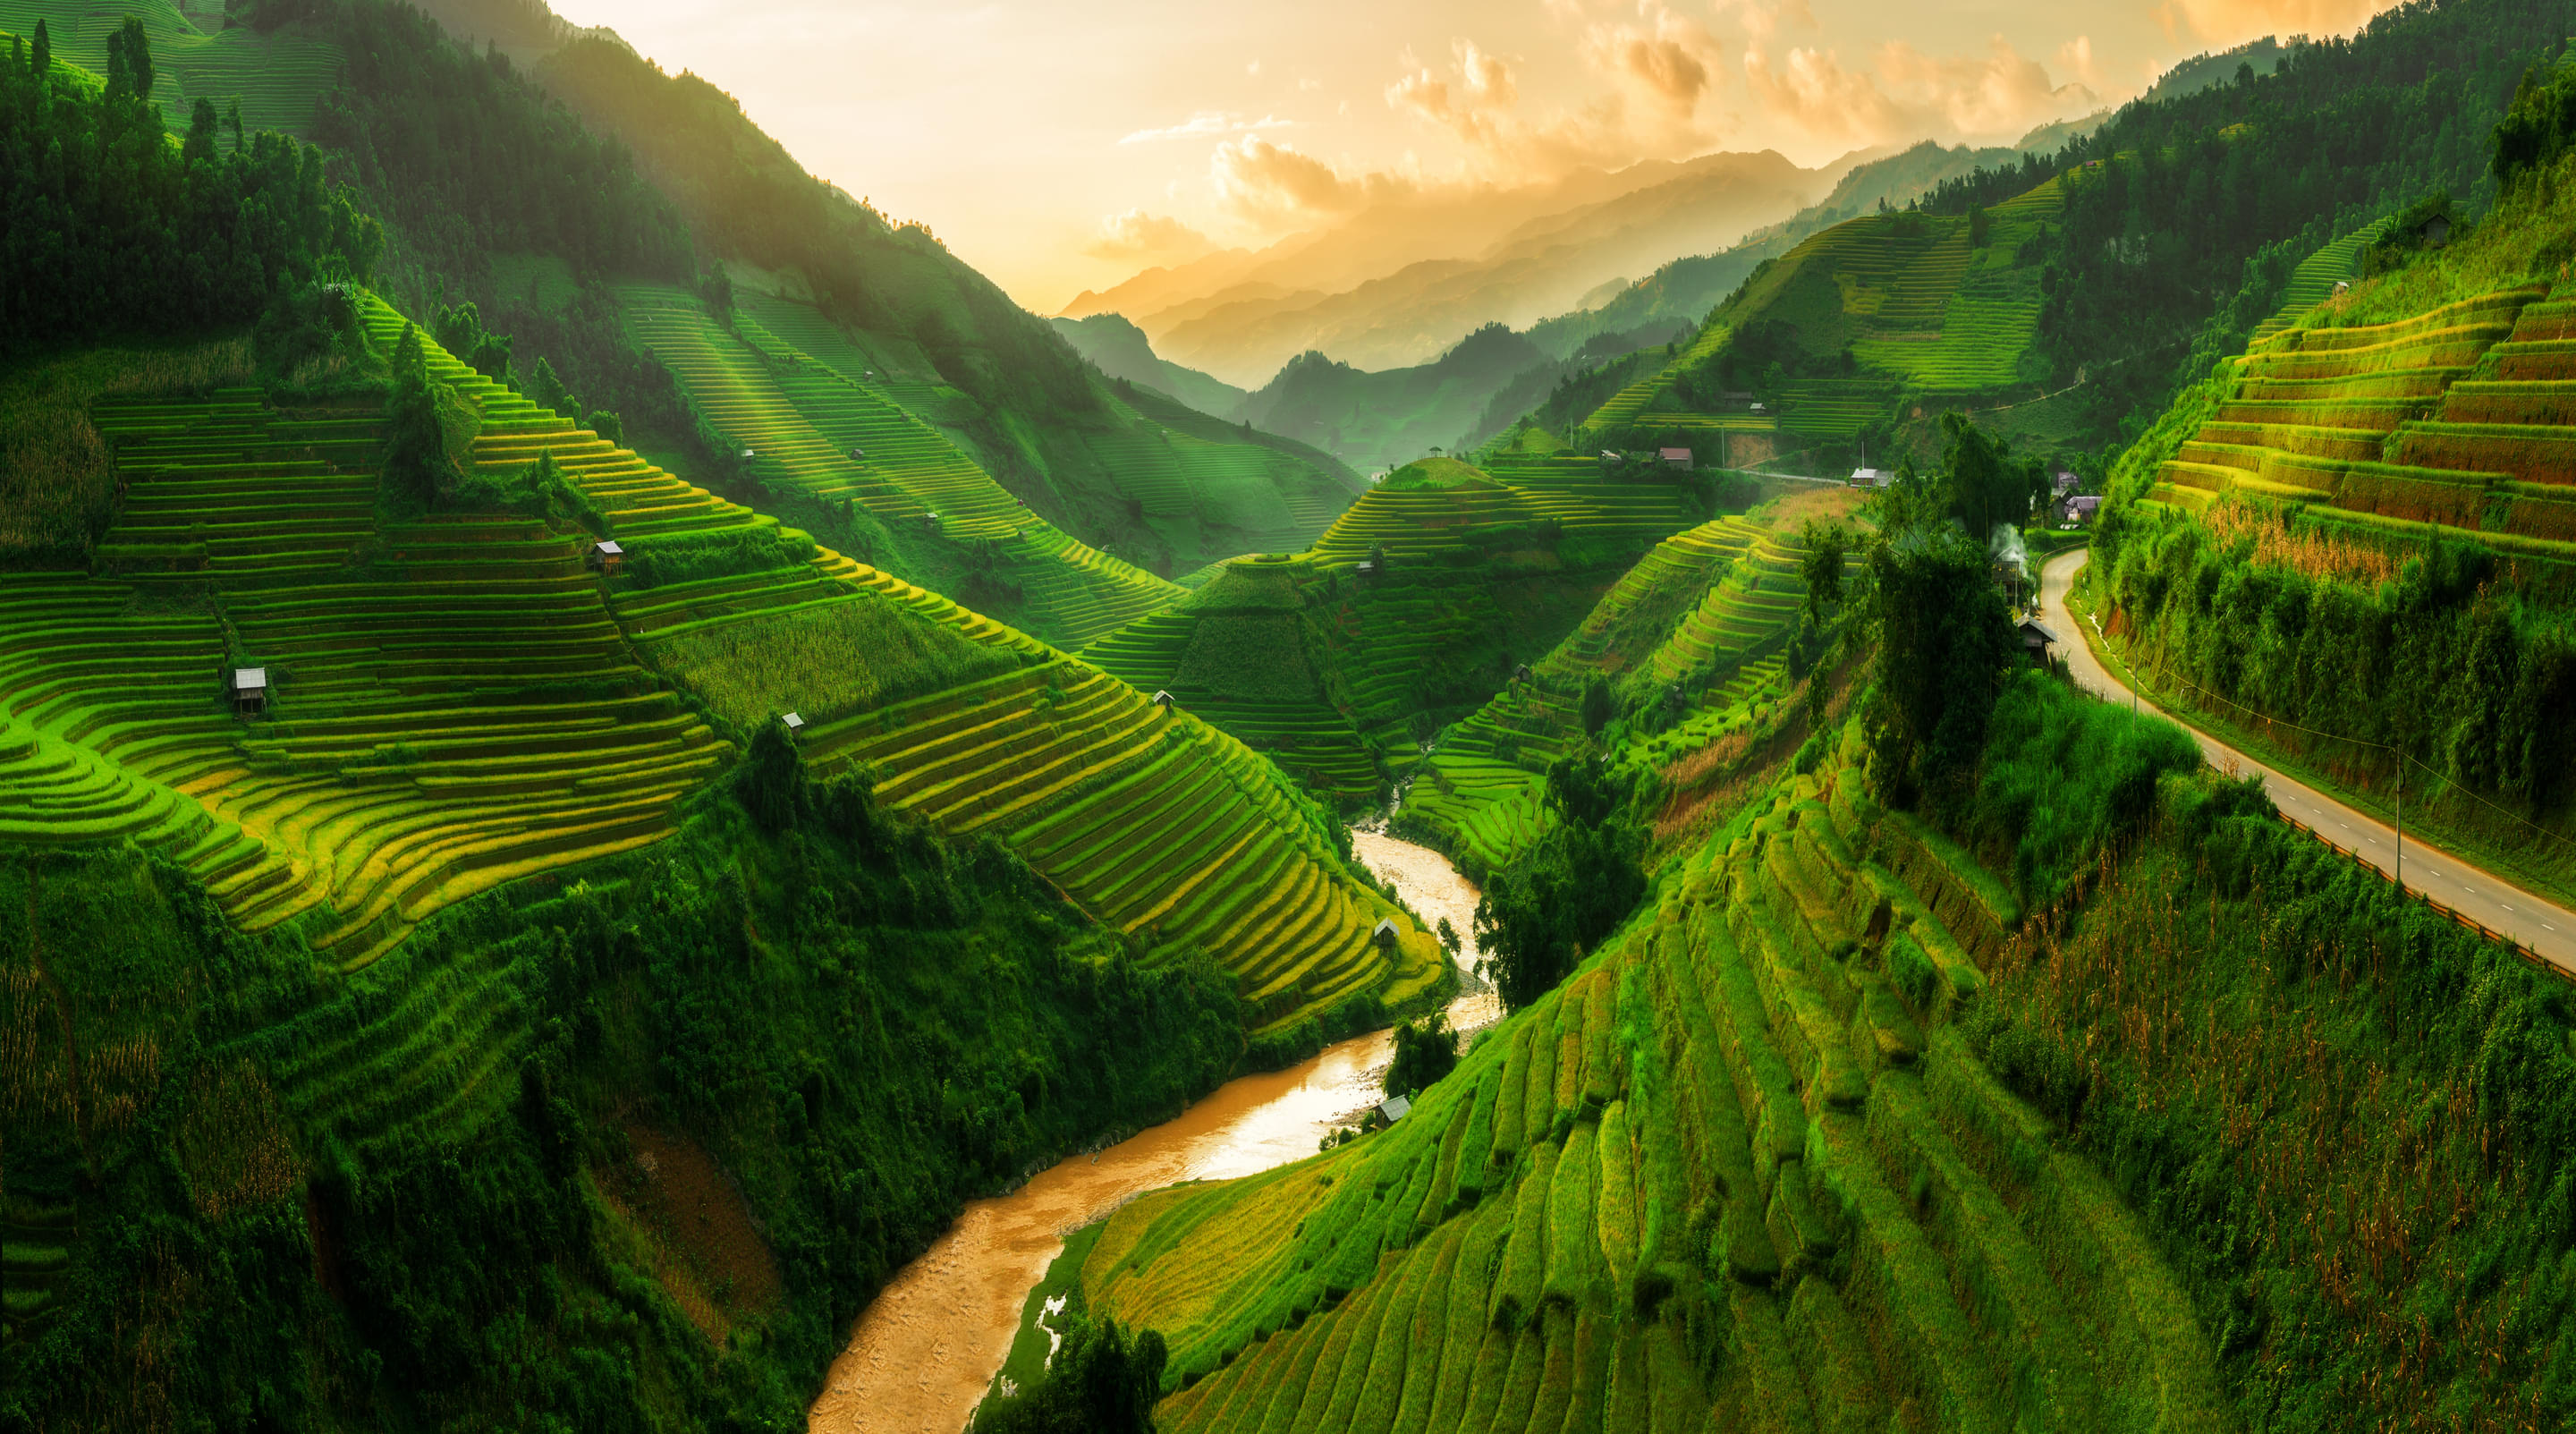 Best Places To Stay in Sapa